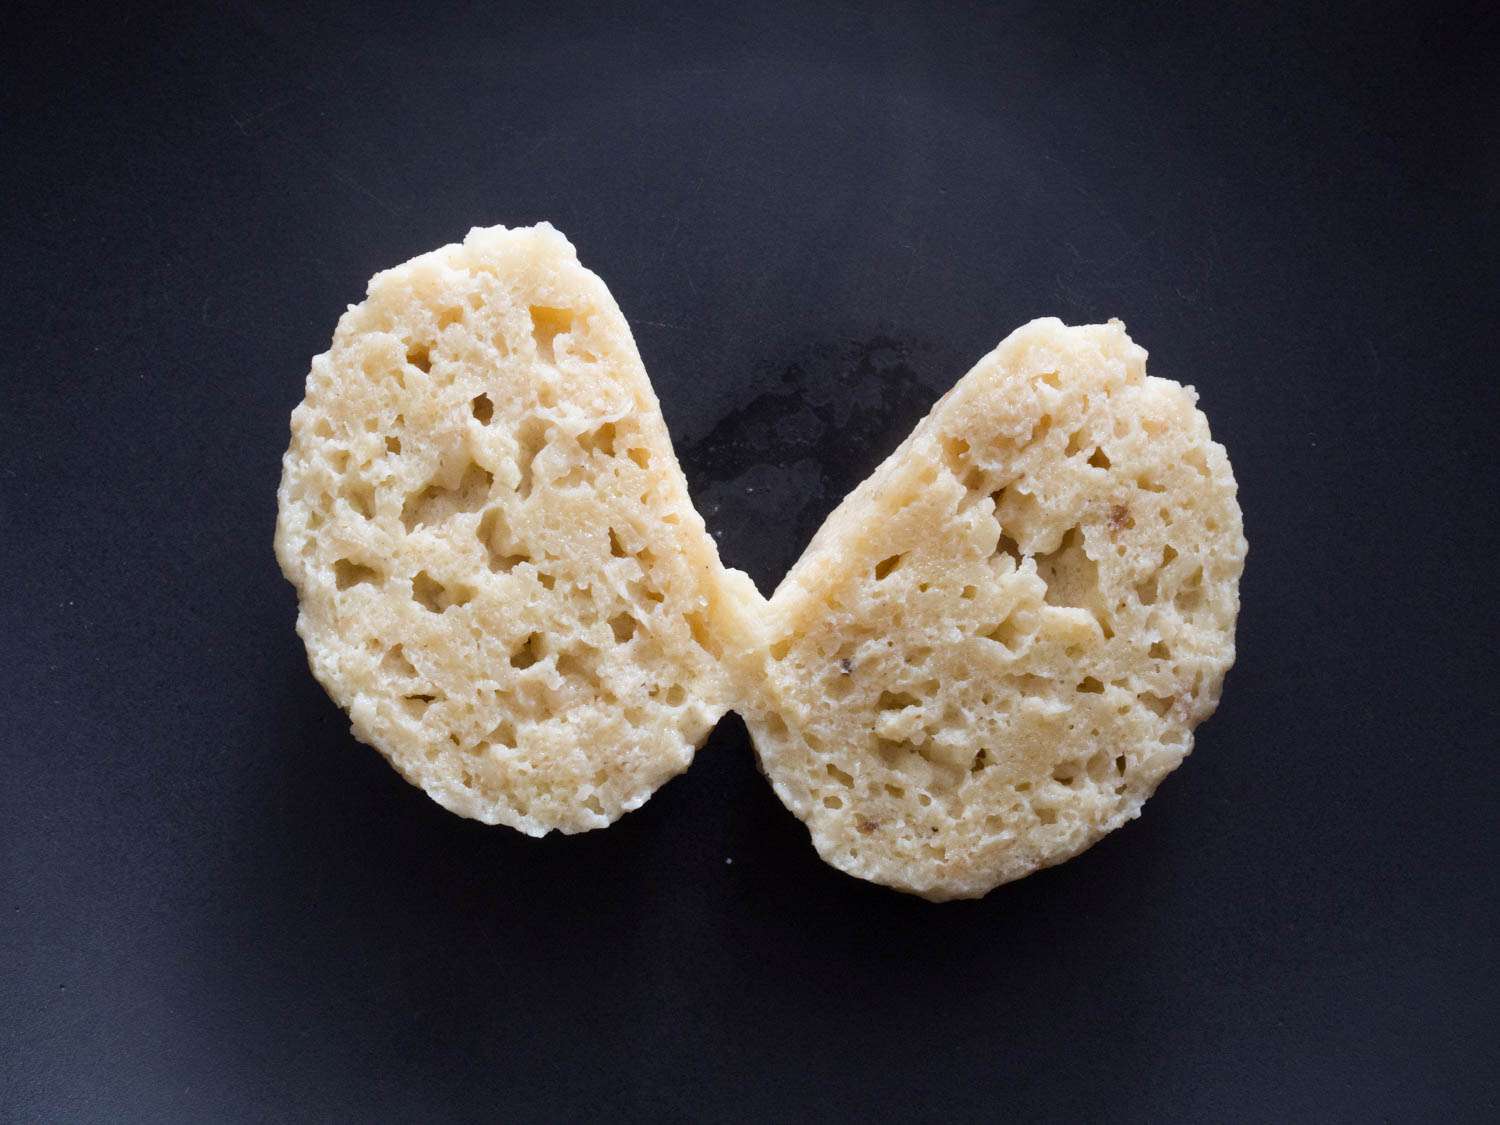 Close-up of a beaten-egg-white matzo ball, cut down the middle. Both halves have been turned so that their cut side is facing the camera. The internal structure is irregular with holes and pockets.